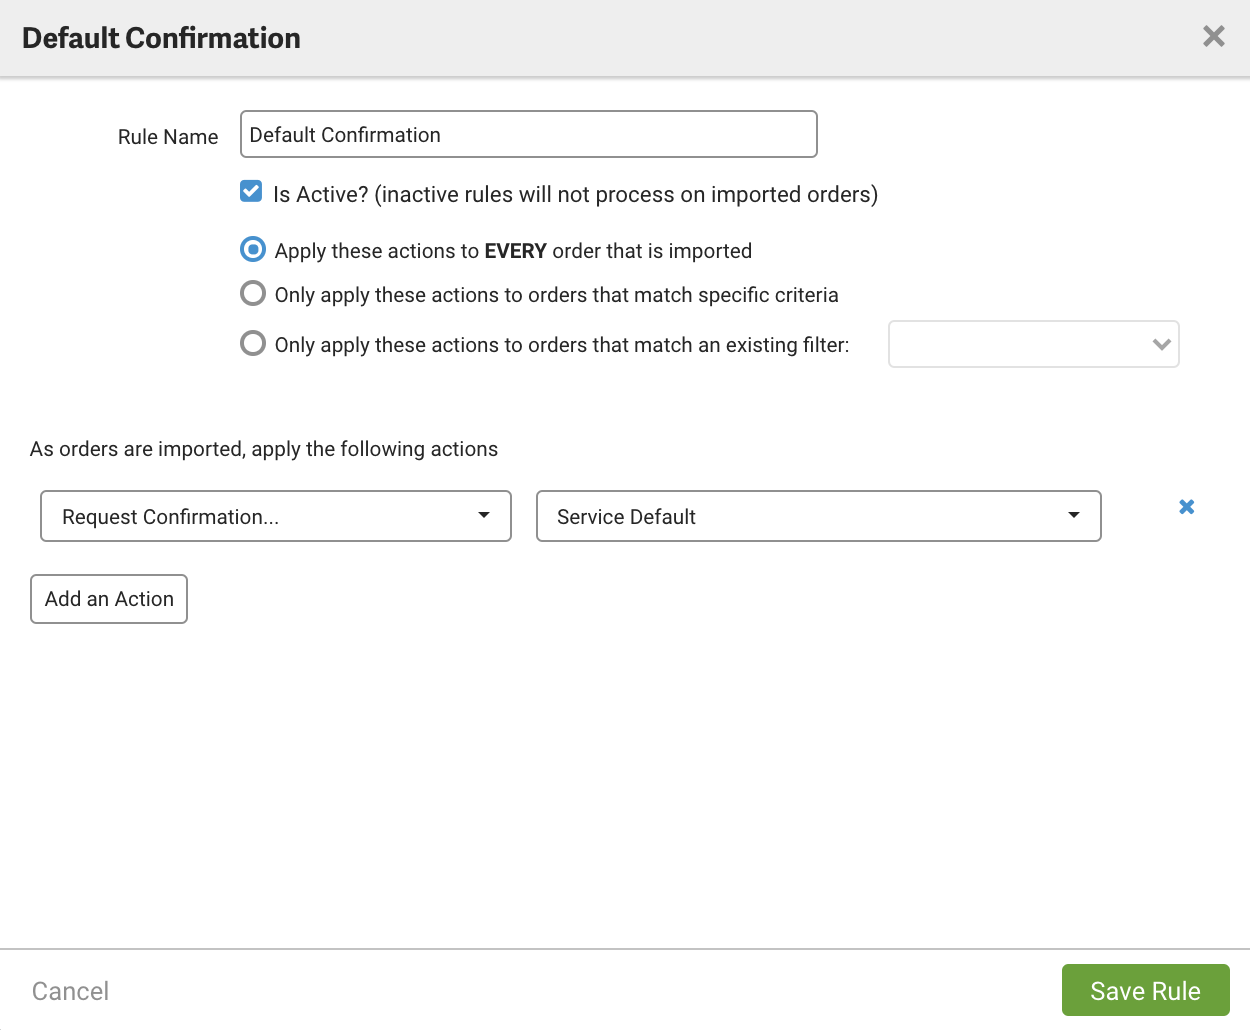 Criteria: Every order. Action: Request Confirmation - Service Default.